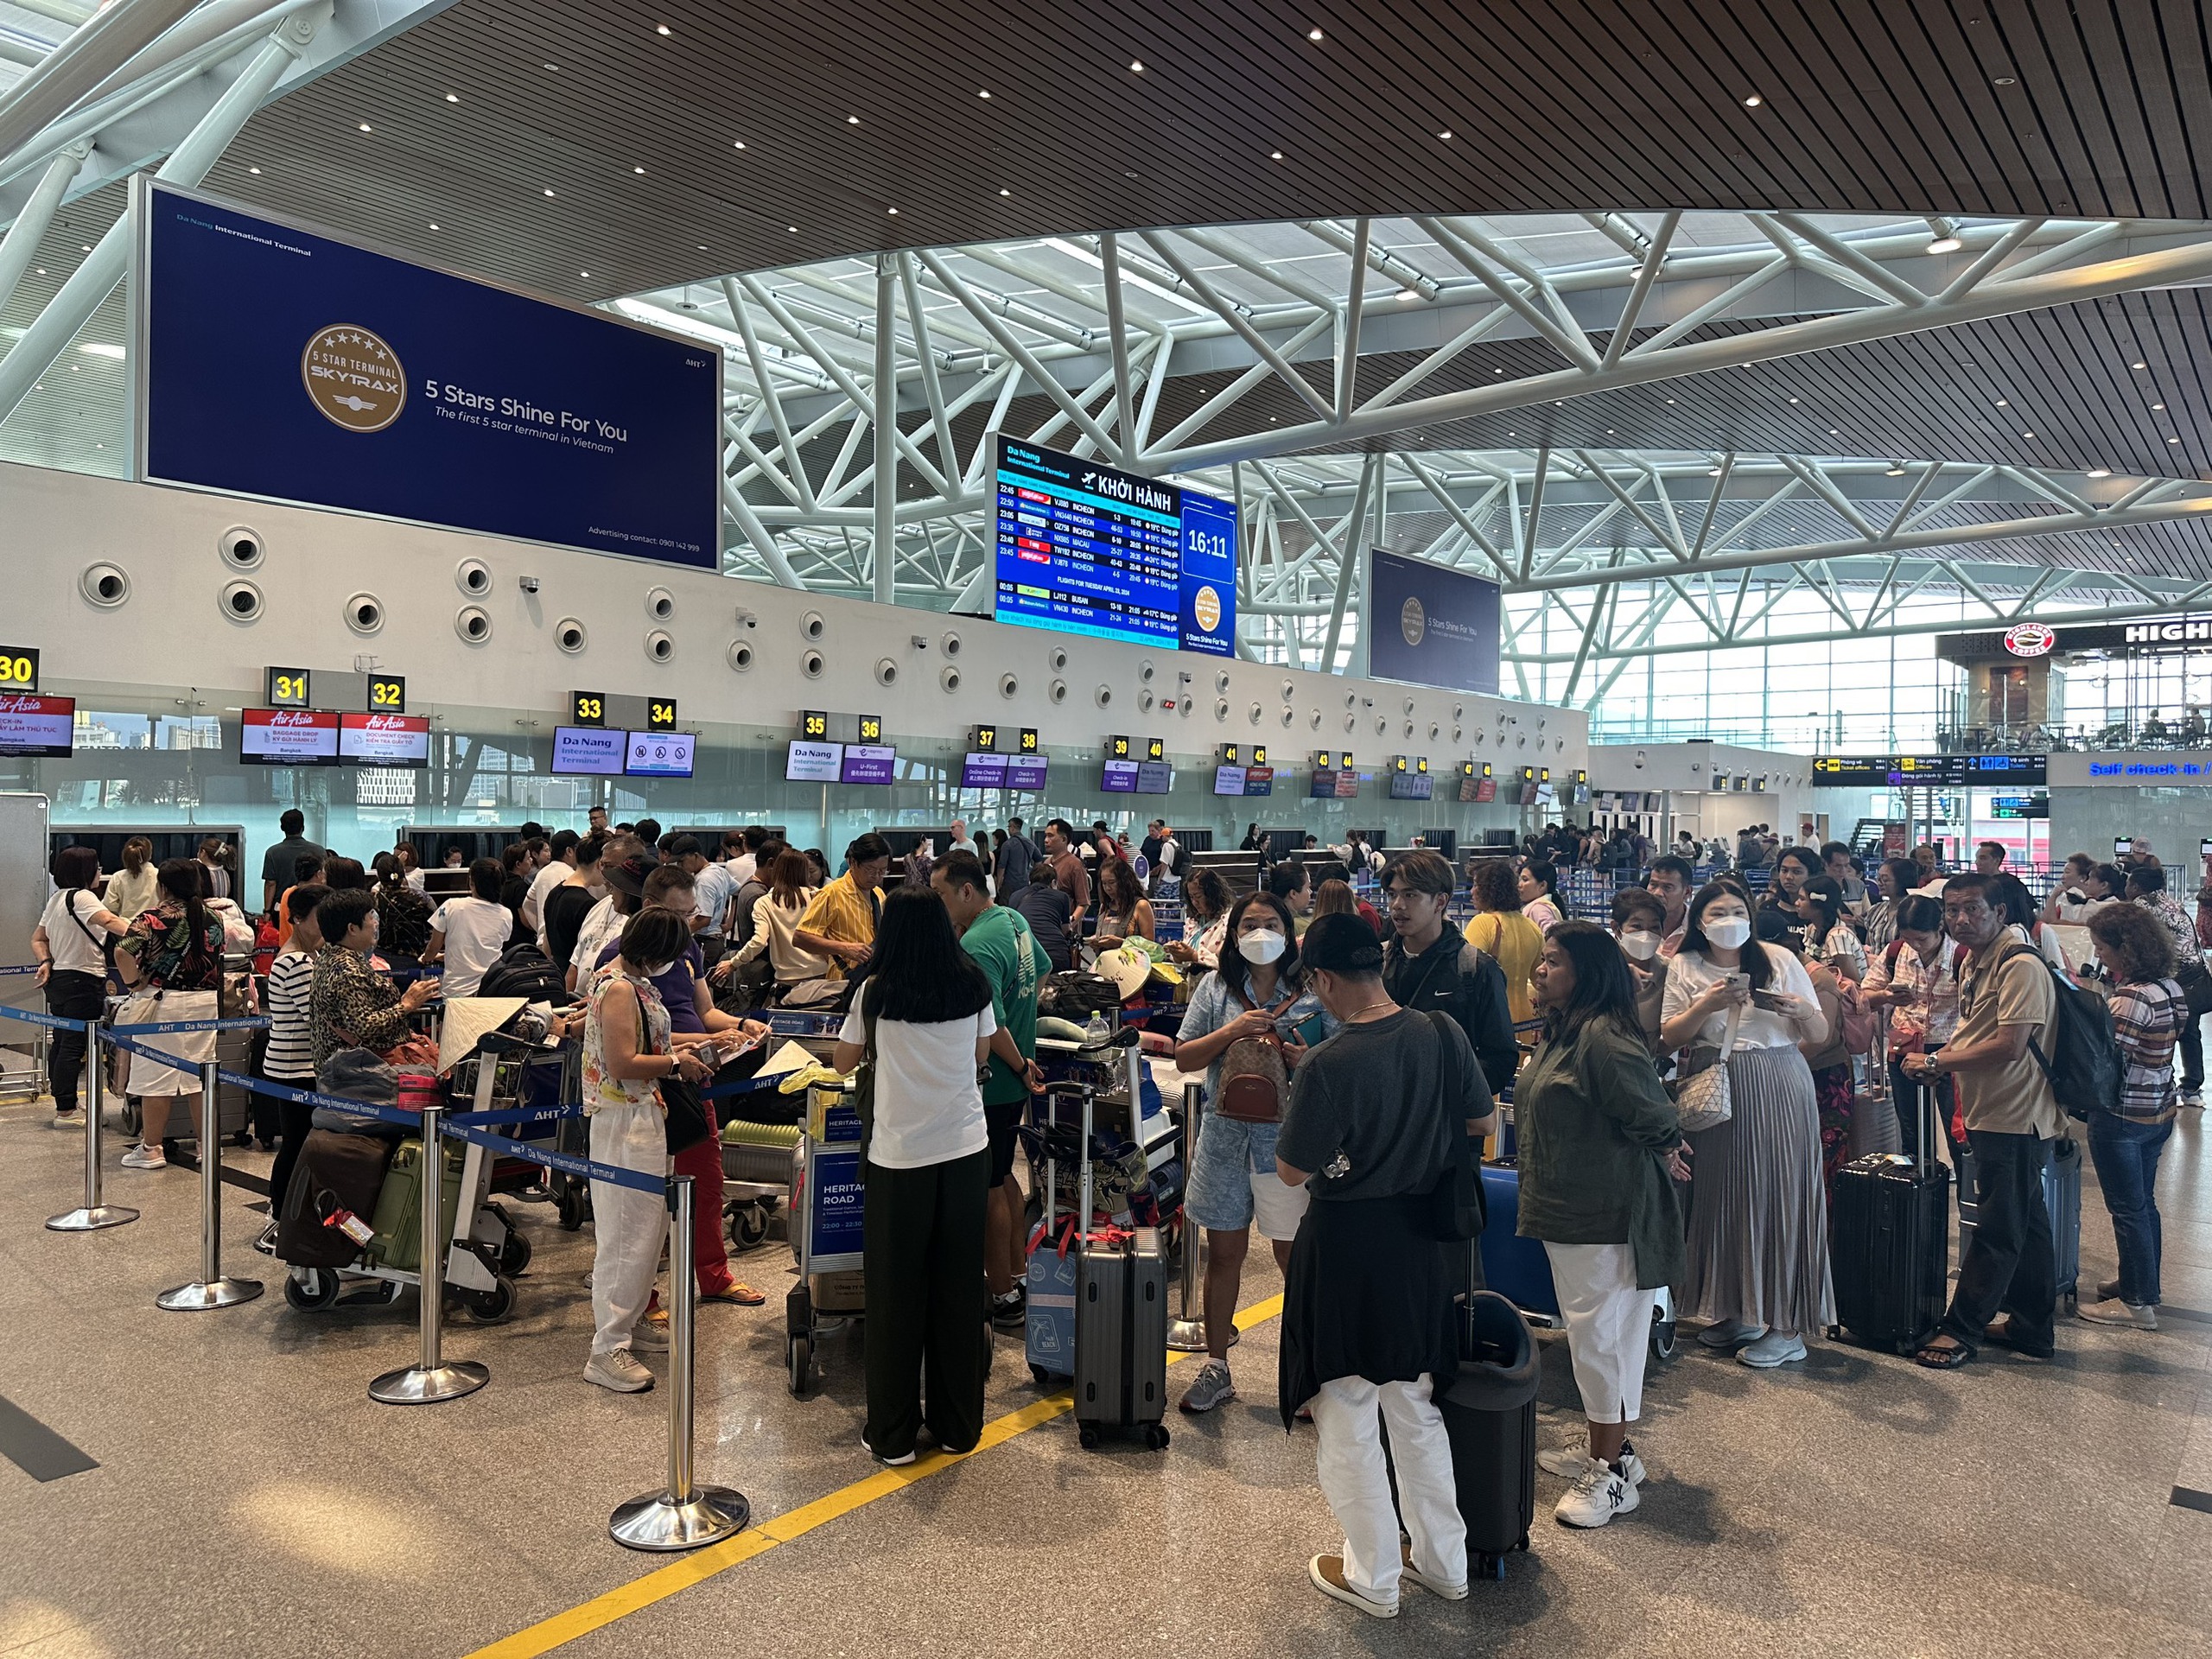 The application of artificial intelligence aims to shorten check-in time at Da Nang airport